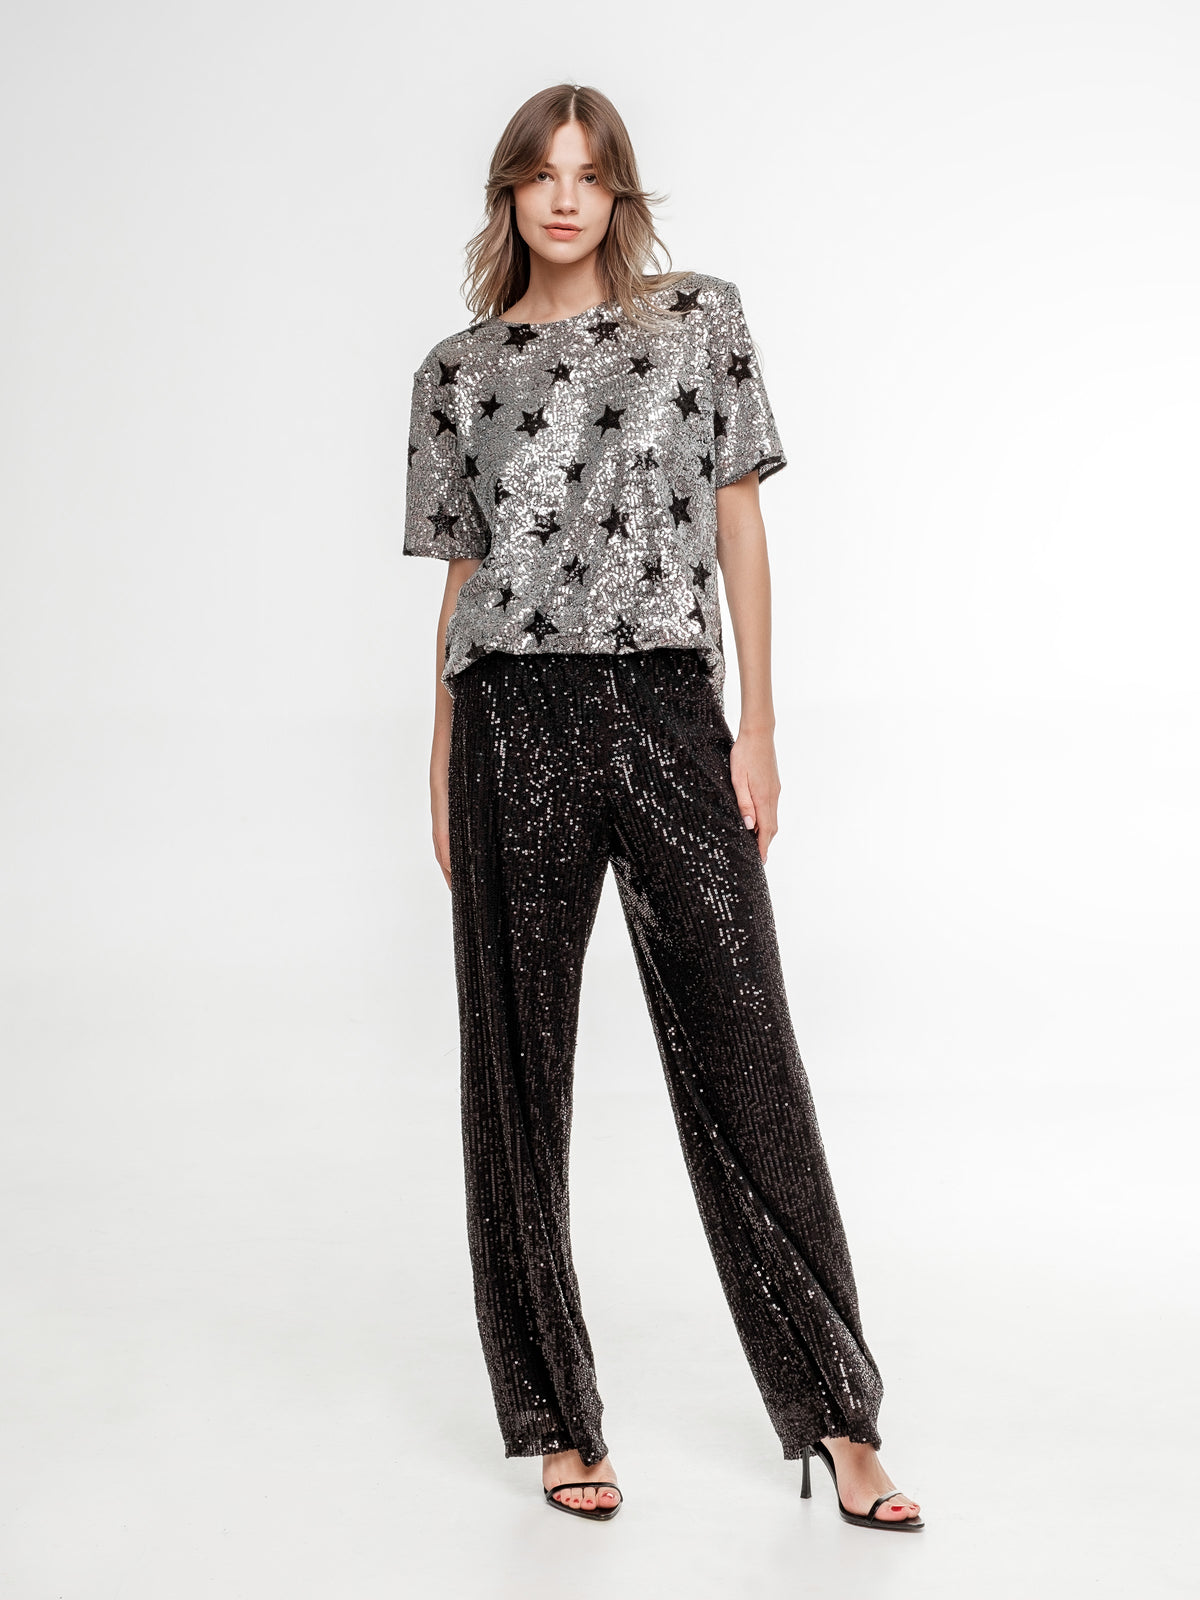 silver glitter top with stars and black glitter wide pants full view